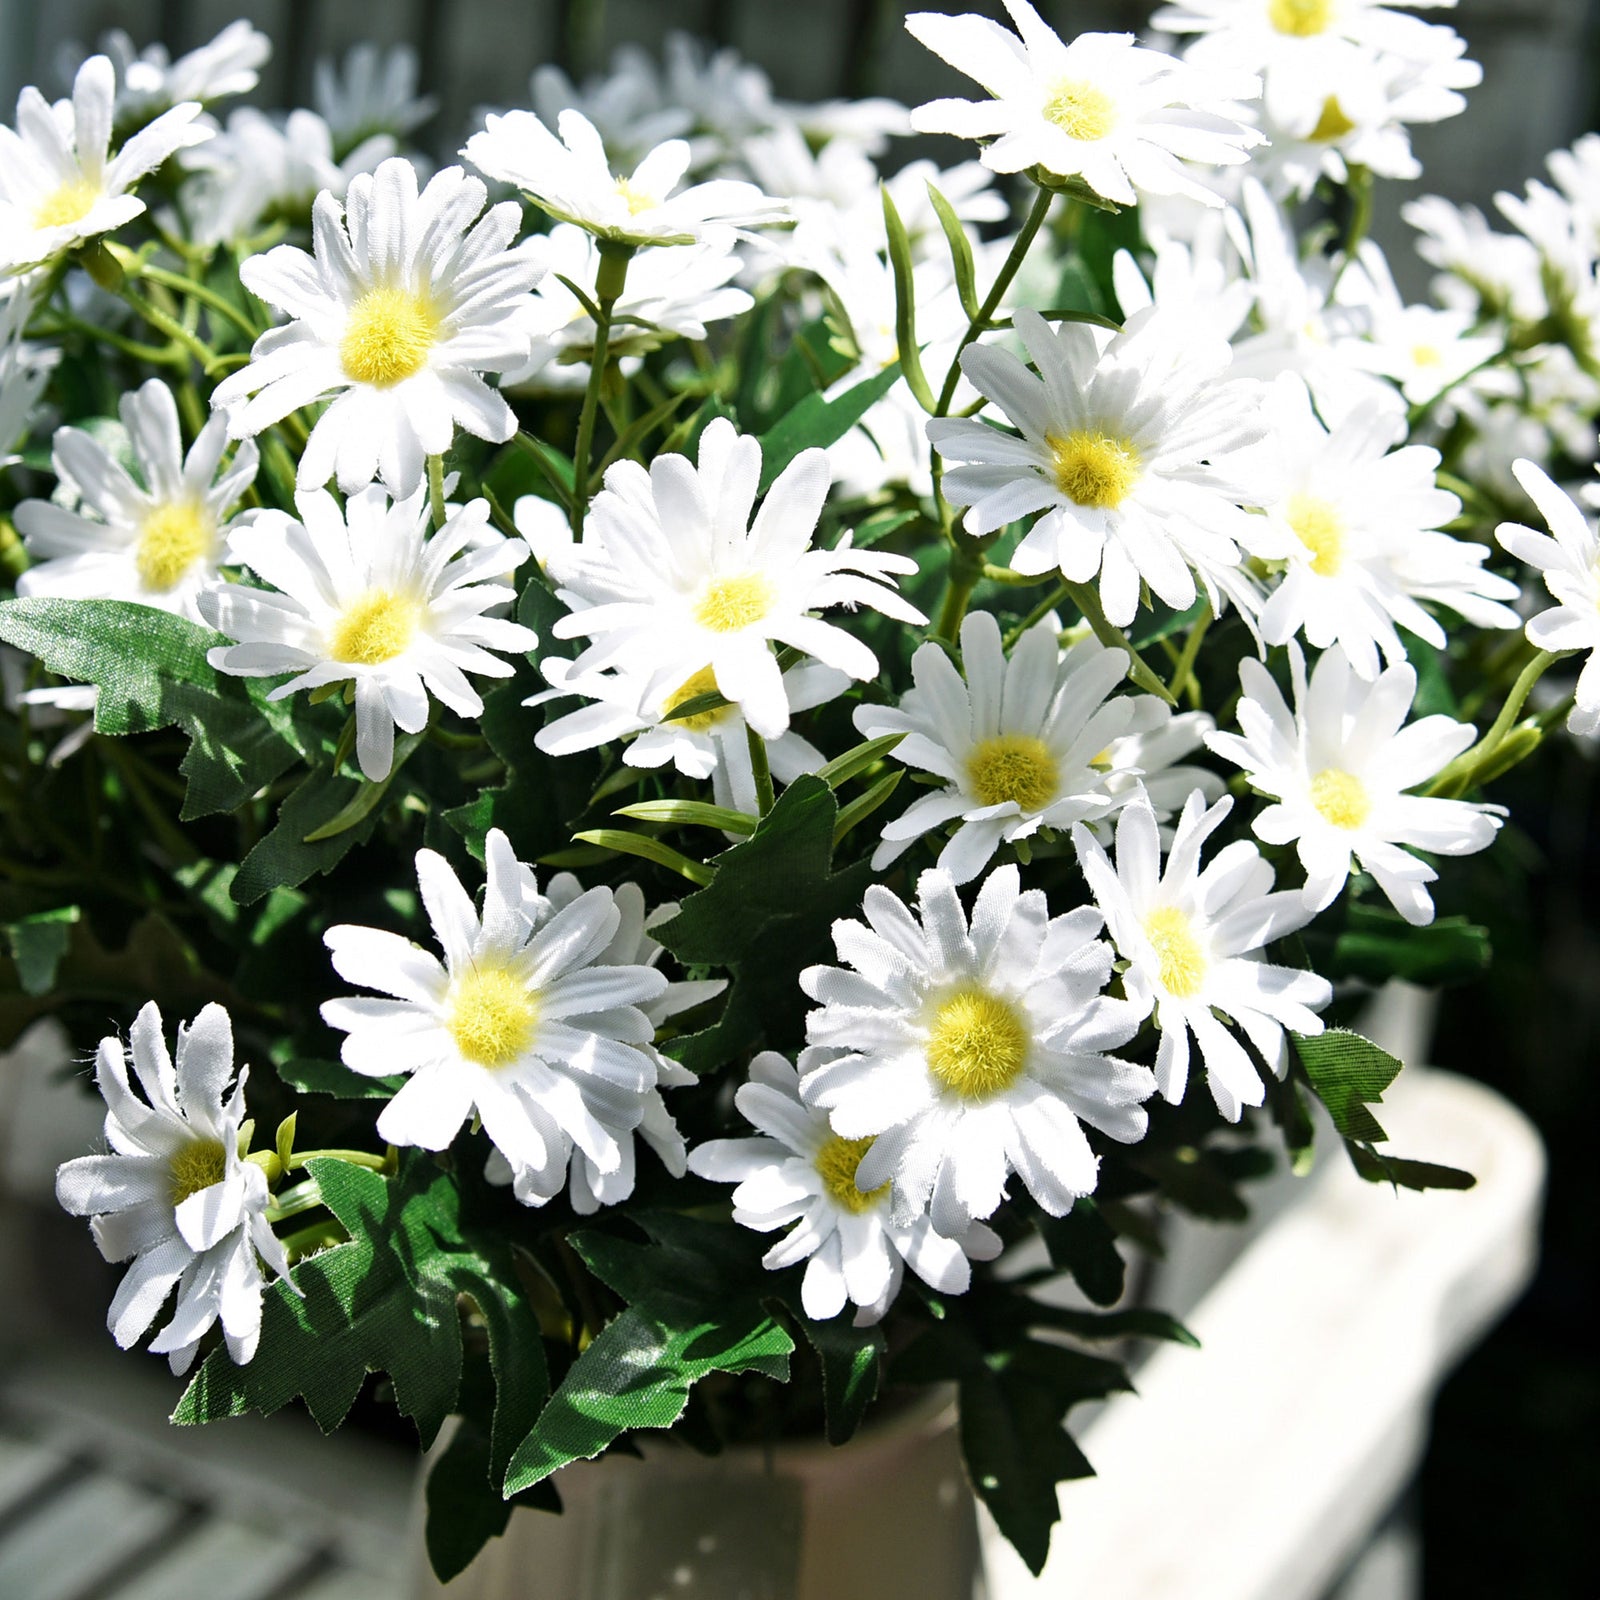 Daisy Silk Flowers Outdoor Artificial Flowers Arrangements (Simply White) 2 Bunches